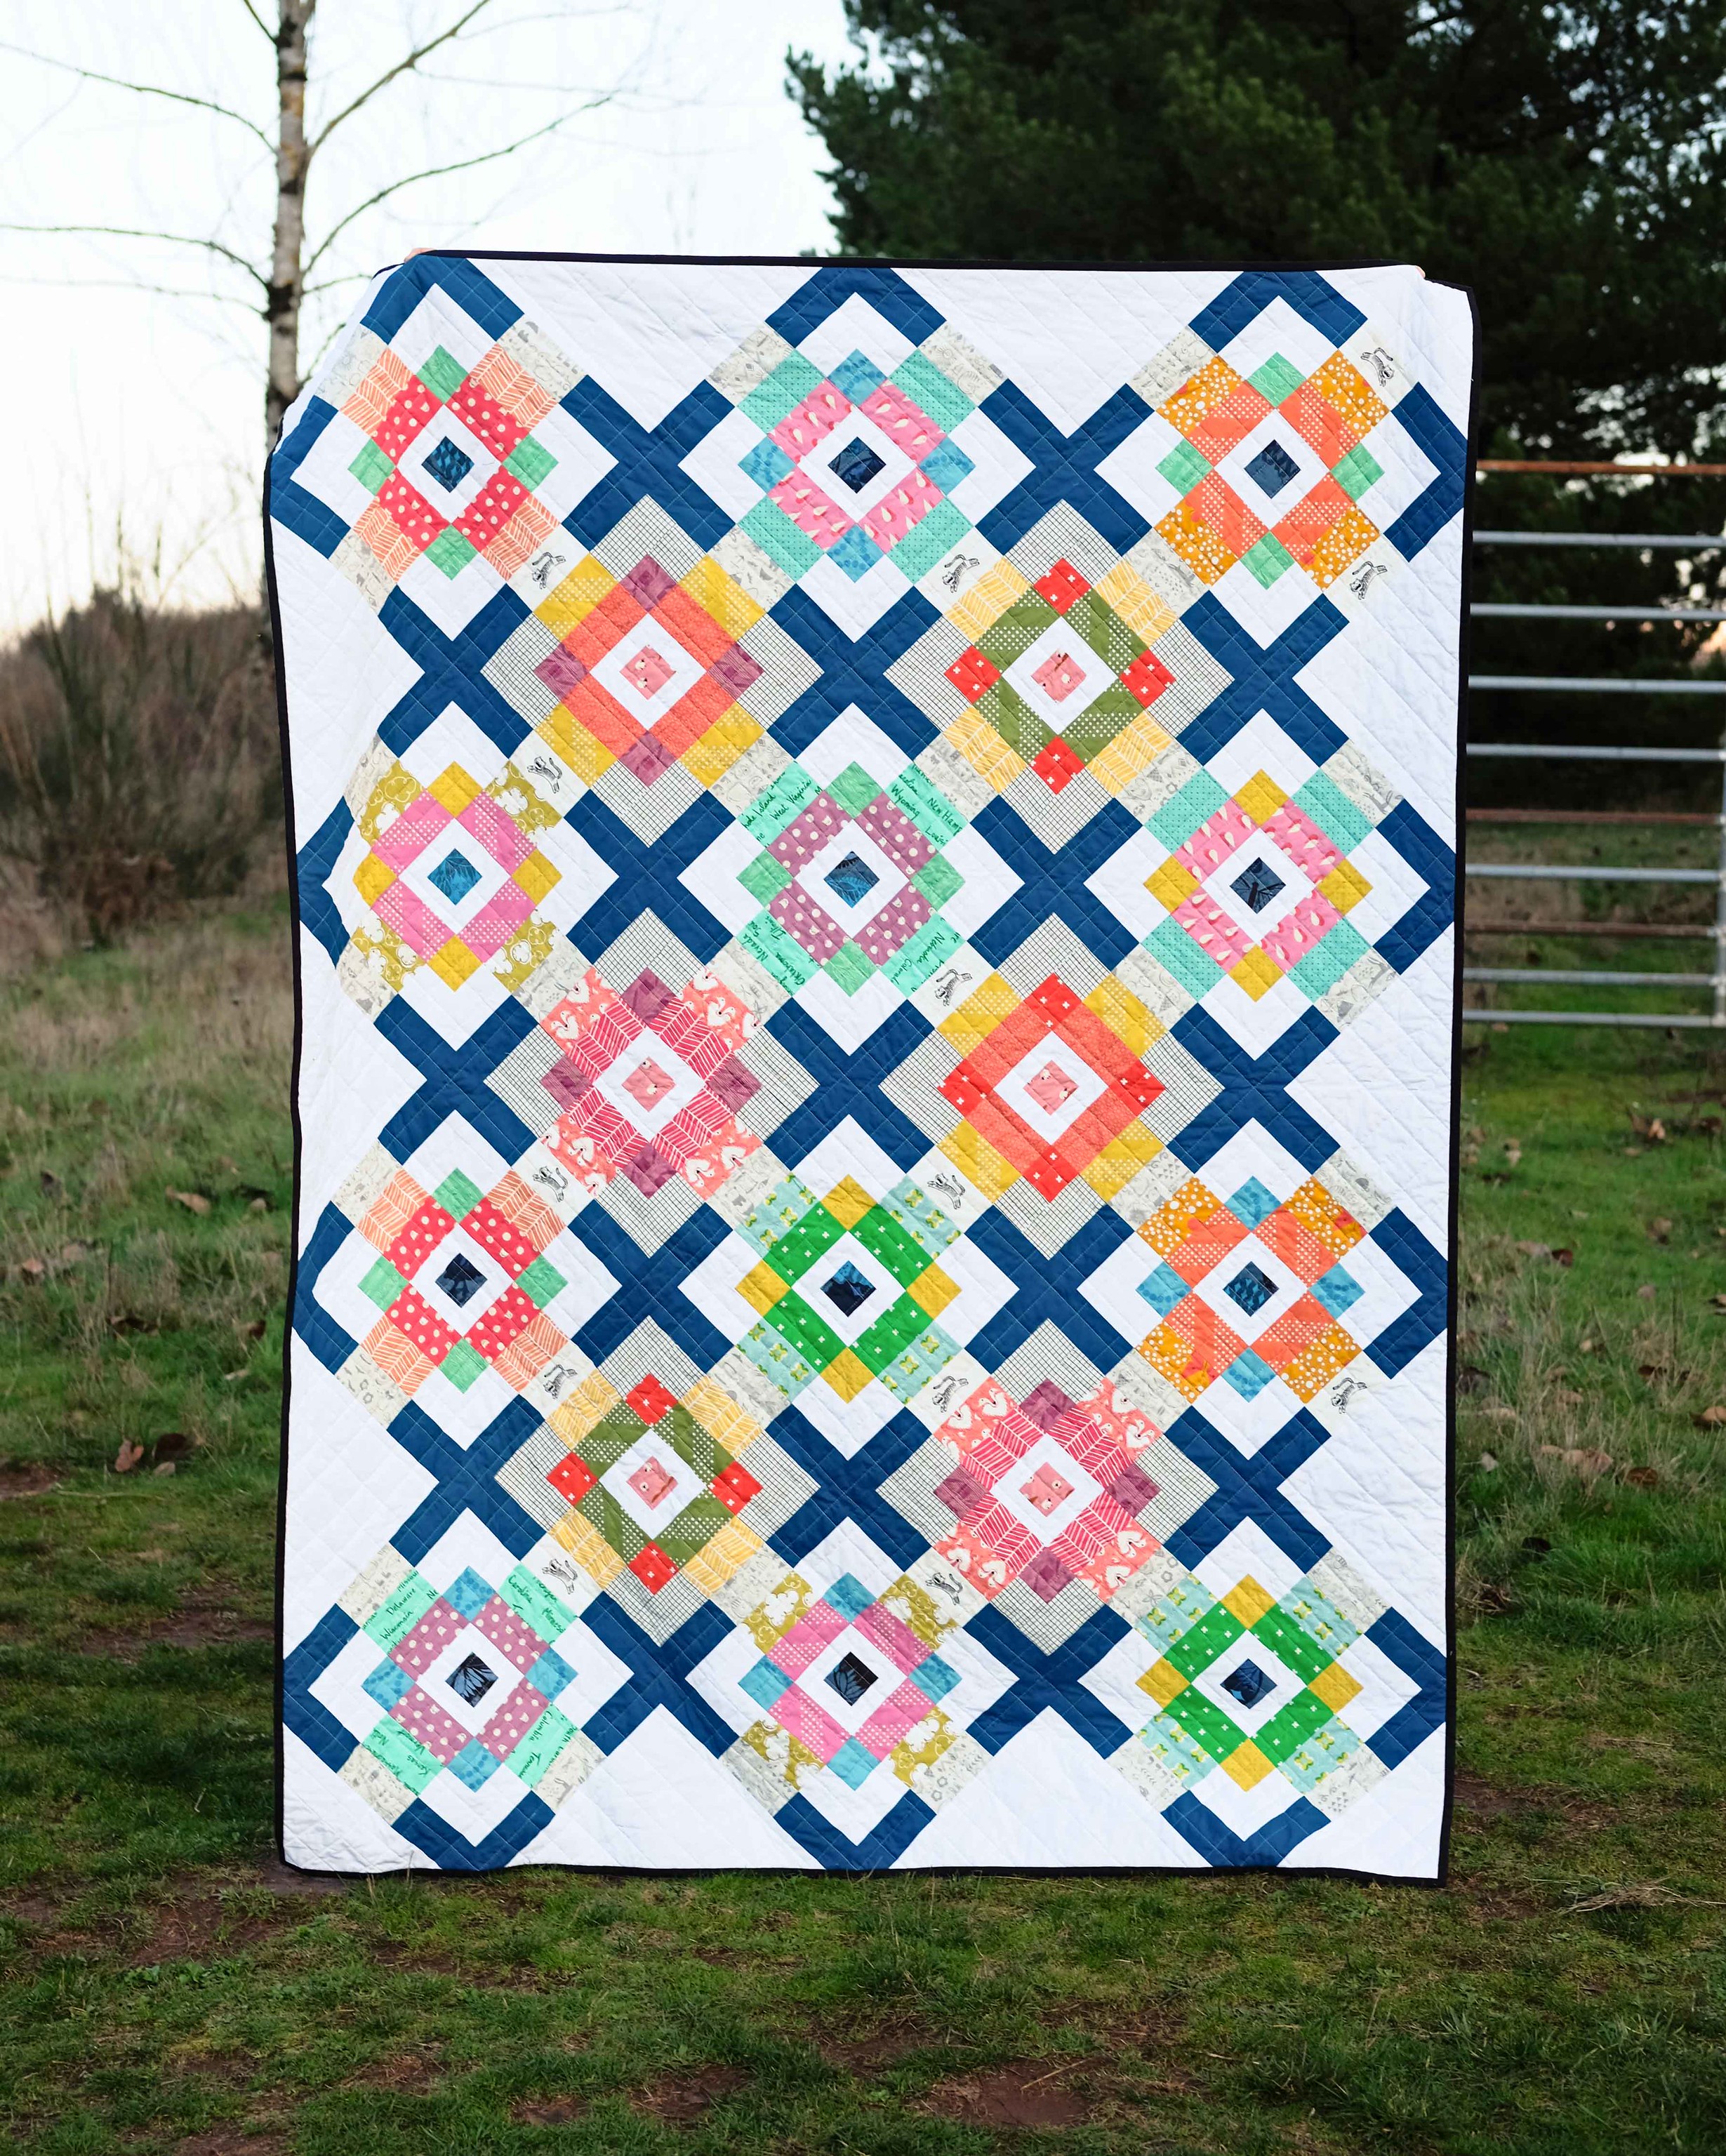 The Birdie Quilt (Jelly Roll Version) - Kitchen Table Quilting